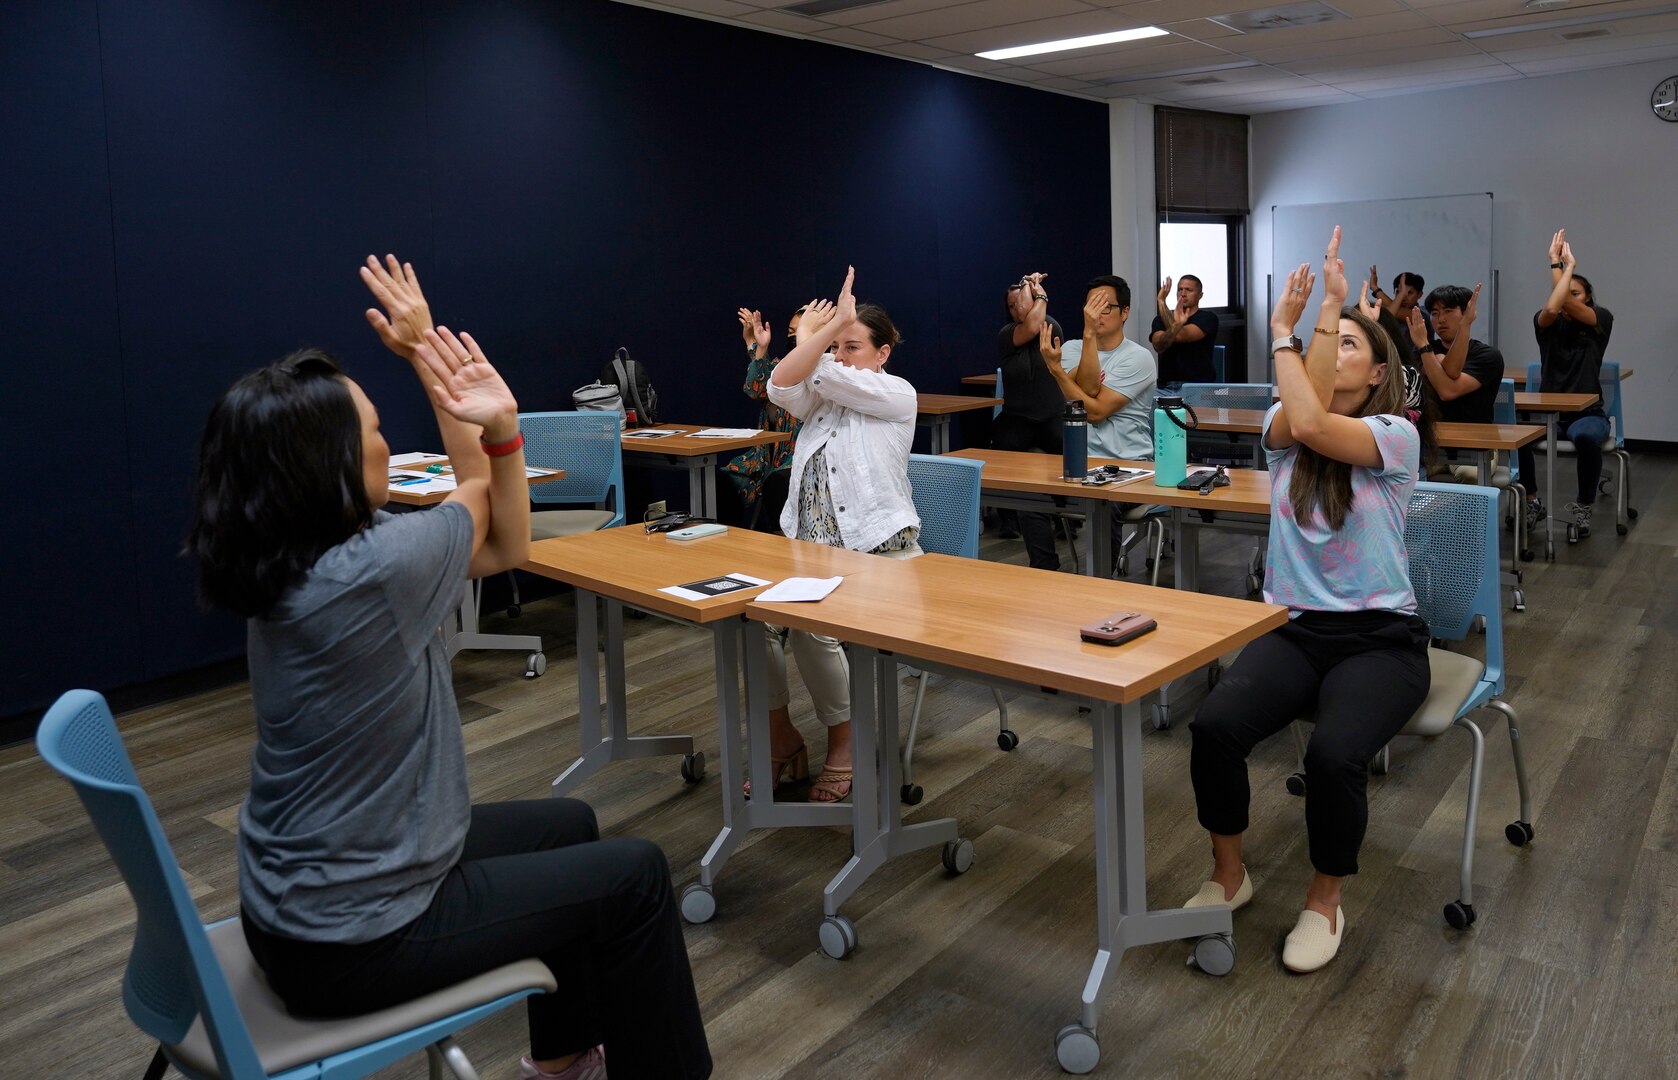 Mae Lynne from Kaiser Permanete, left, demonstrates a seated eagle pose as shipyard personnel mirror the pose during a chair yoga stretch class at Pearl Harbor Naval Shipyard.